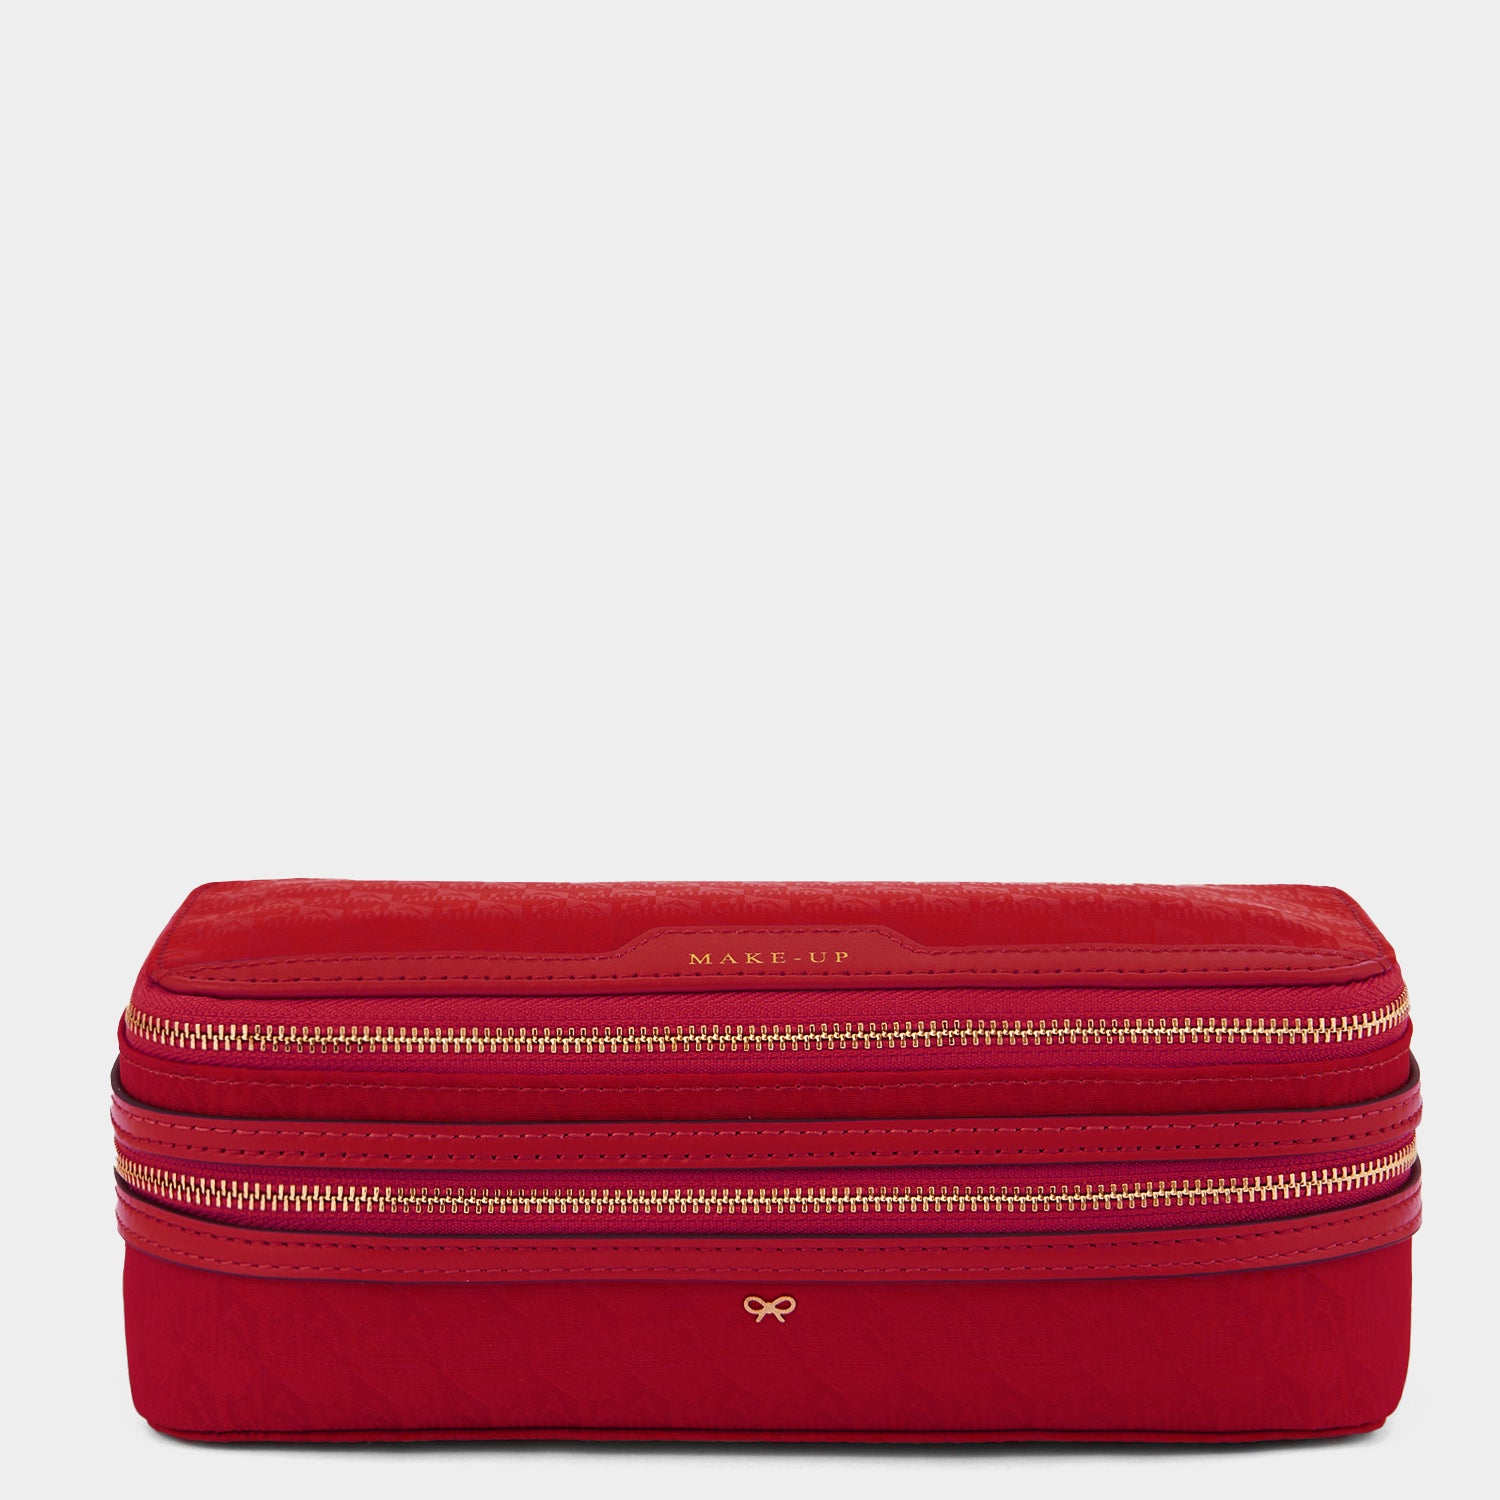 Logo Make-Up Pouch -

                  
                    Jacquard Nylon Up in Red -
                  

                  Anya Hindmarch UK
